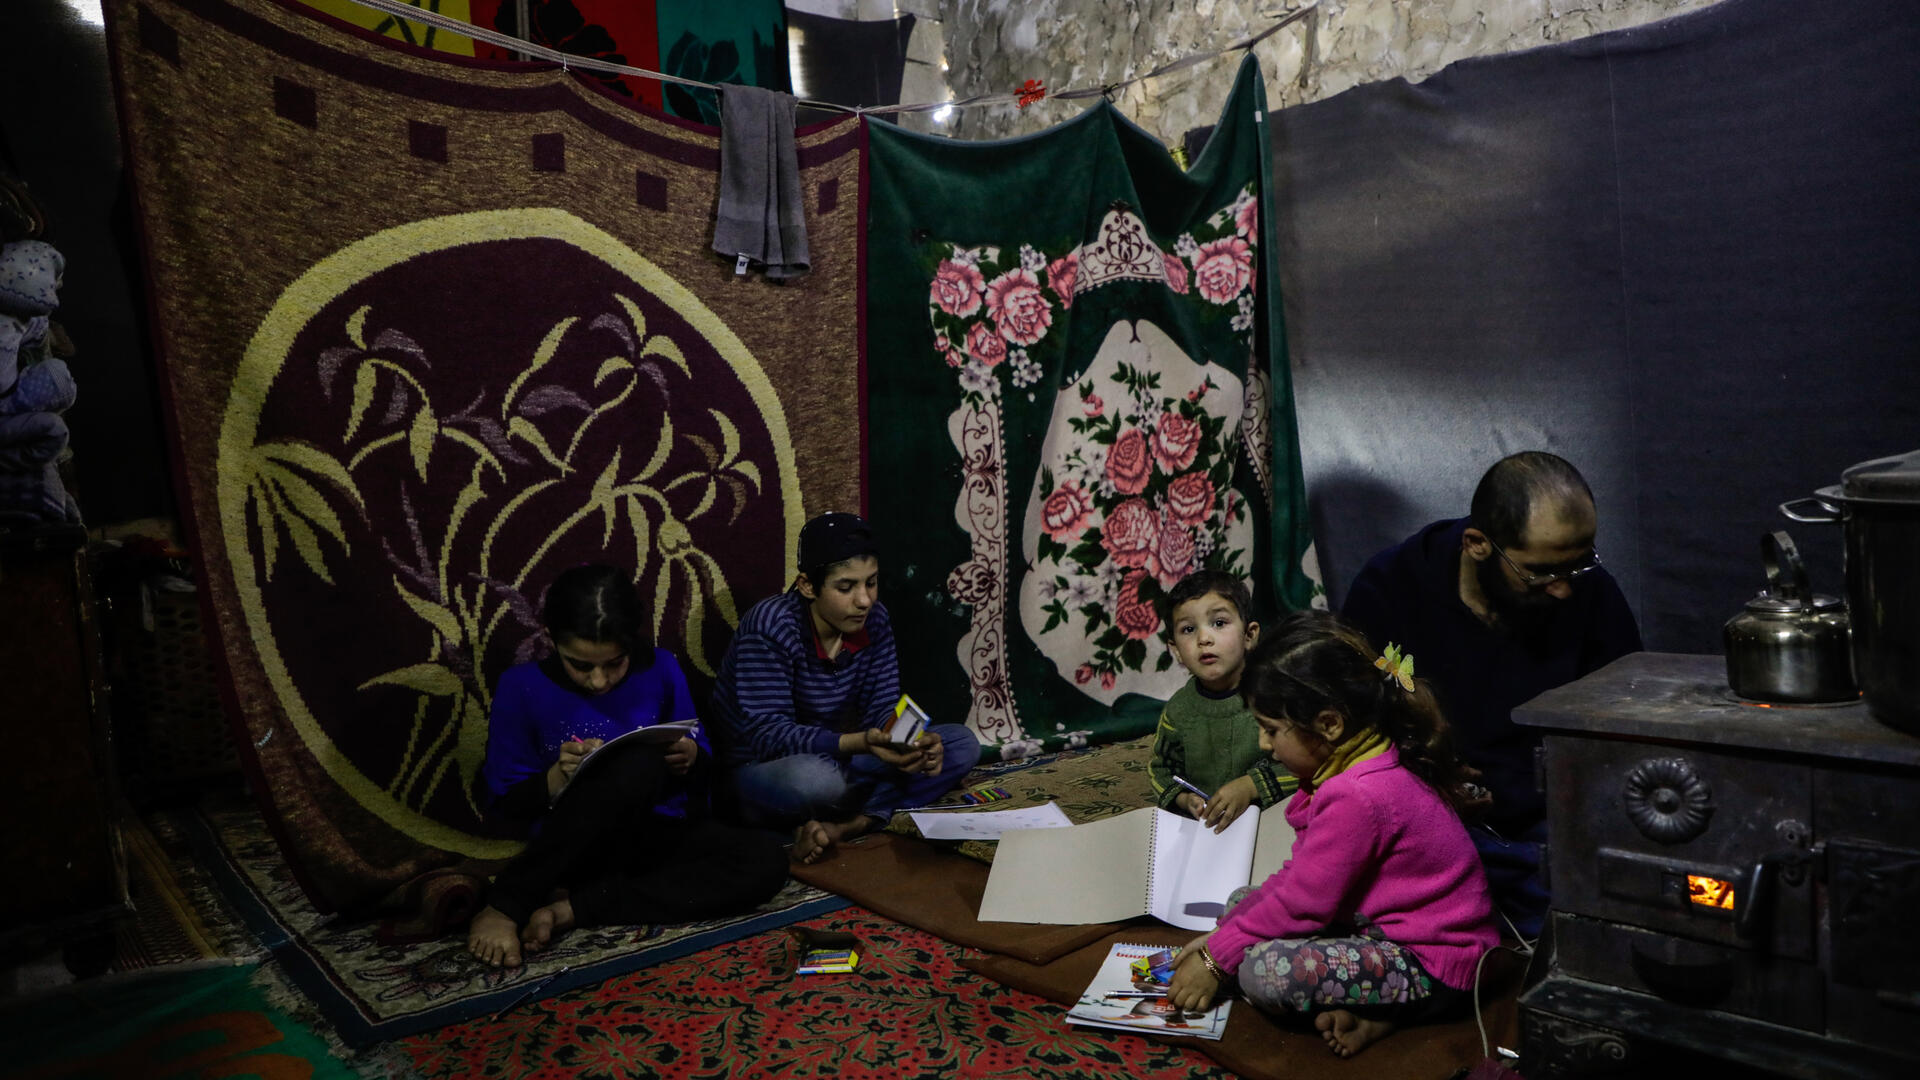 A displaced Syrian family living in an unfinished building with blankets for walls. The father tends to a small stove.